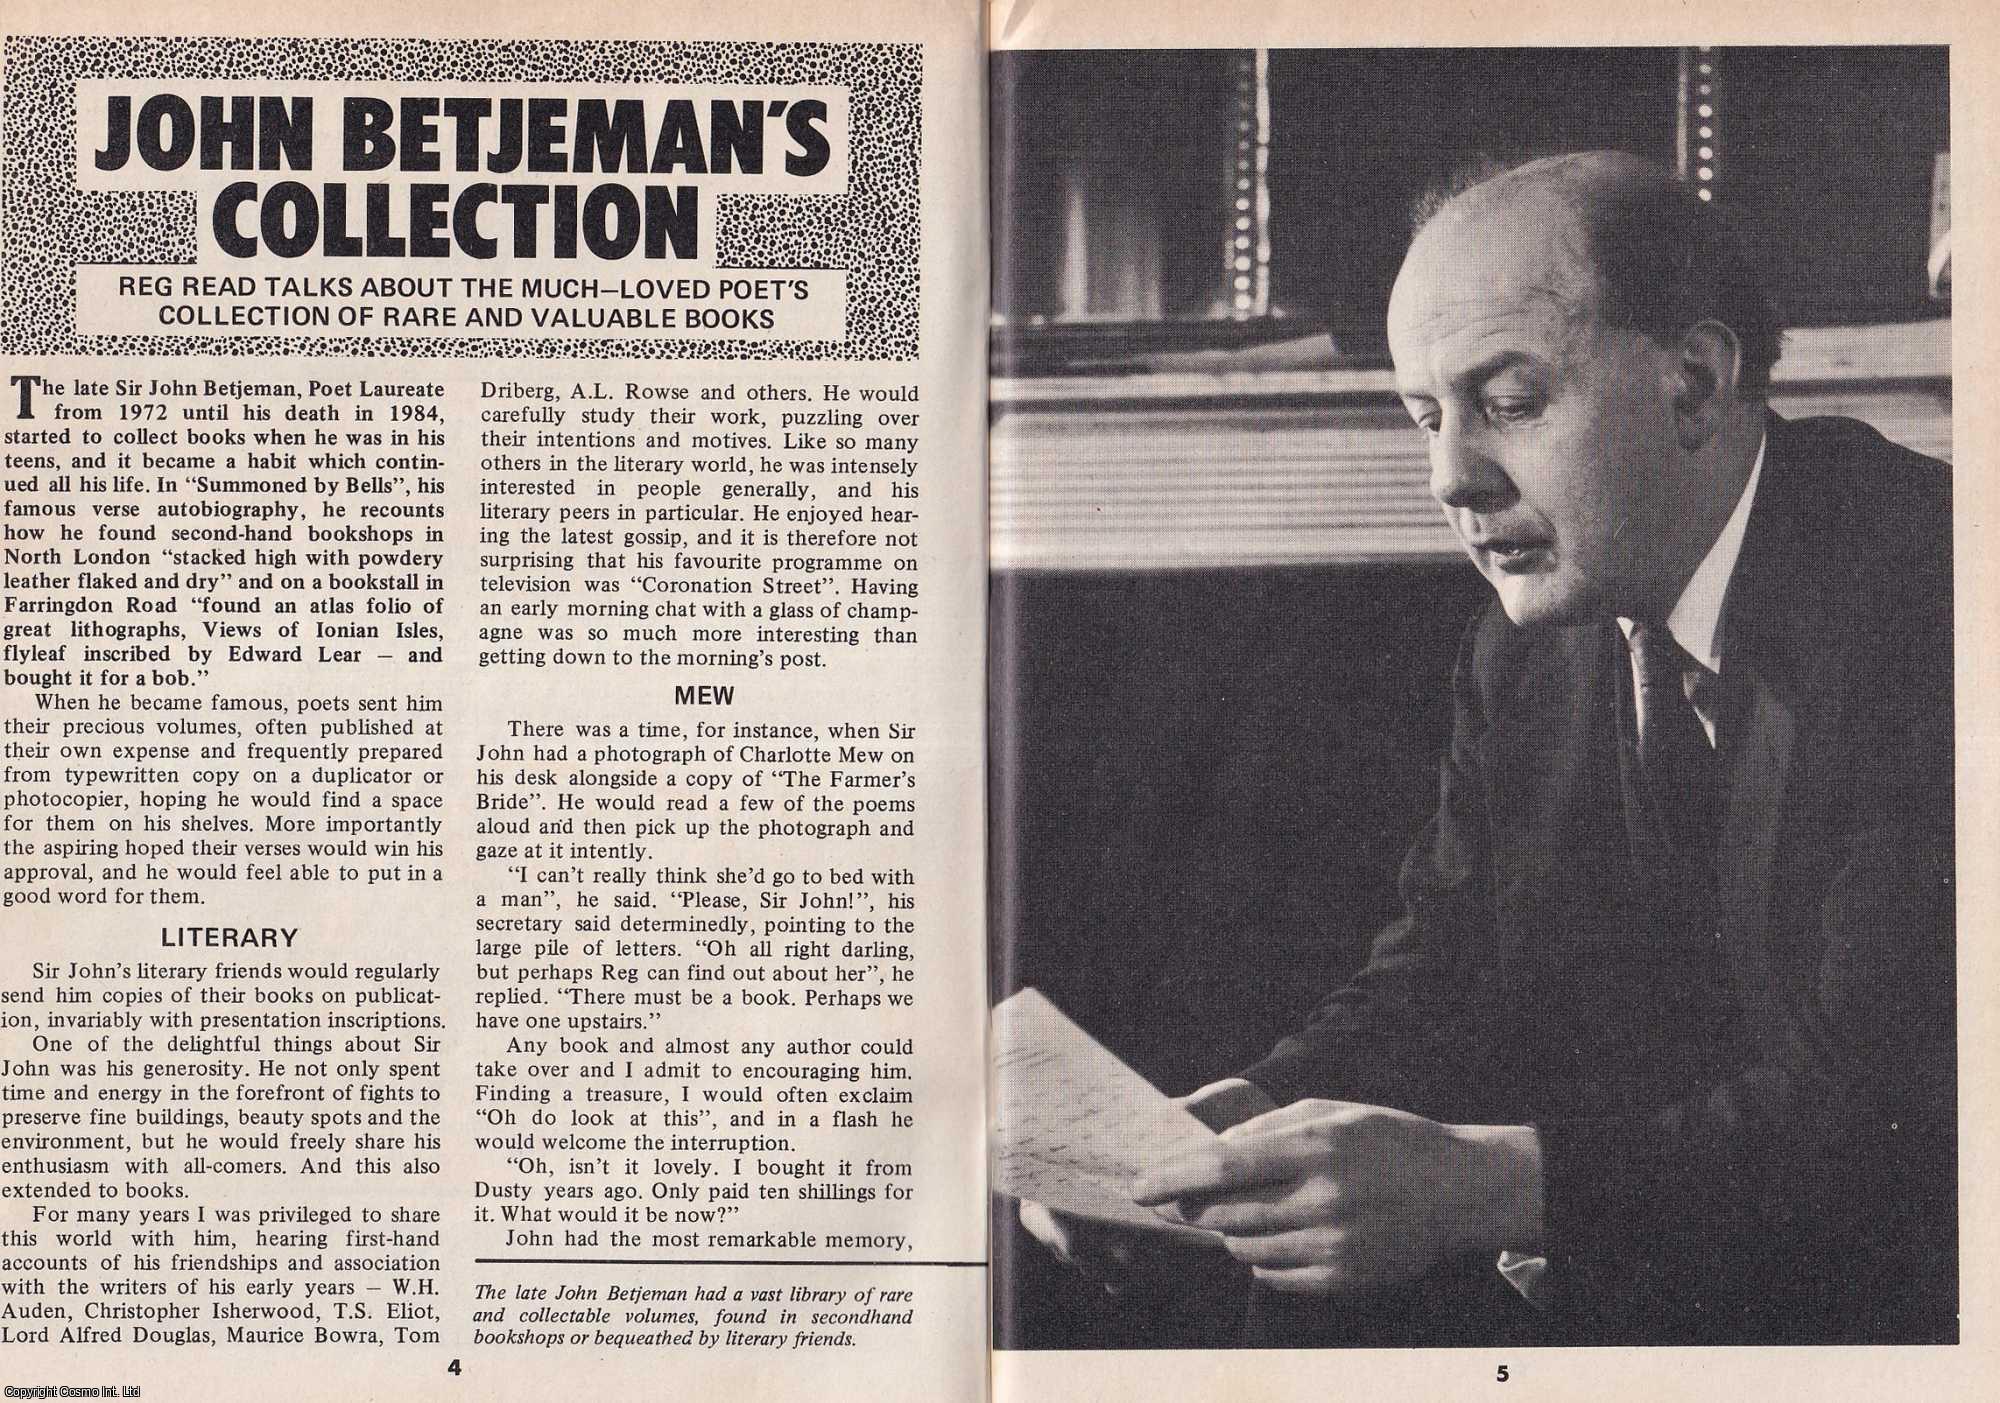 Reg Read - John Betjeman's Collection. This is an original article separated from an issue of The Book & Magazine Collector publication.